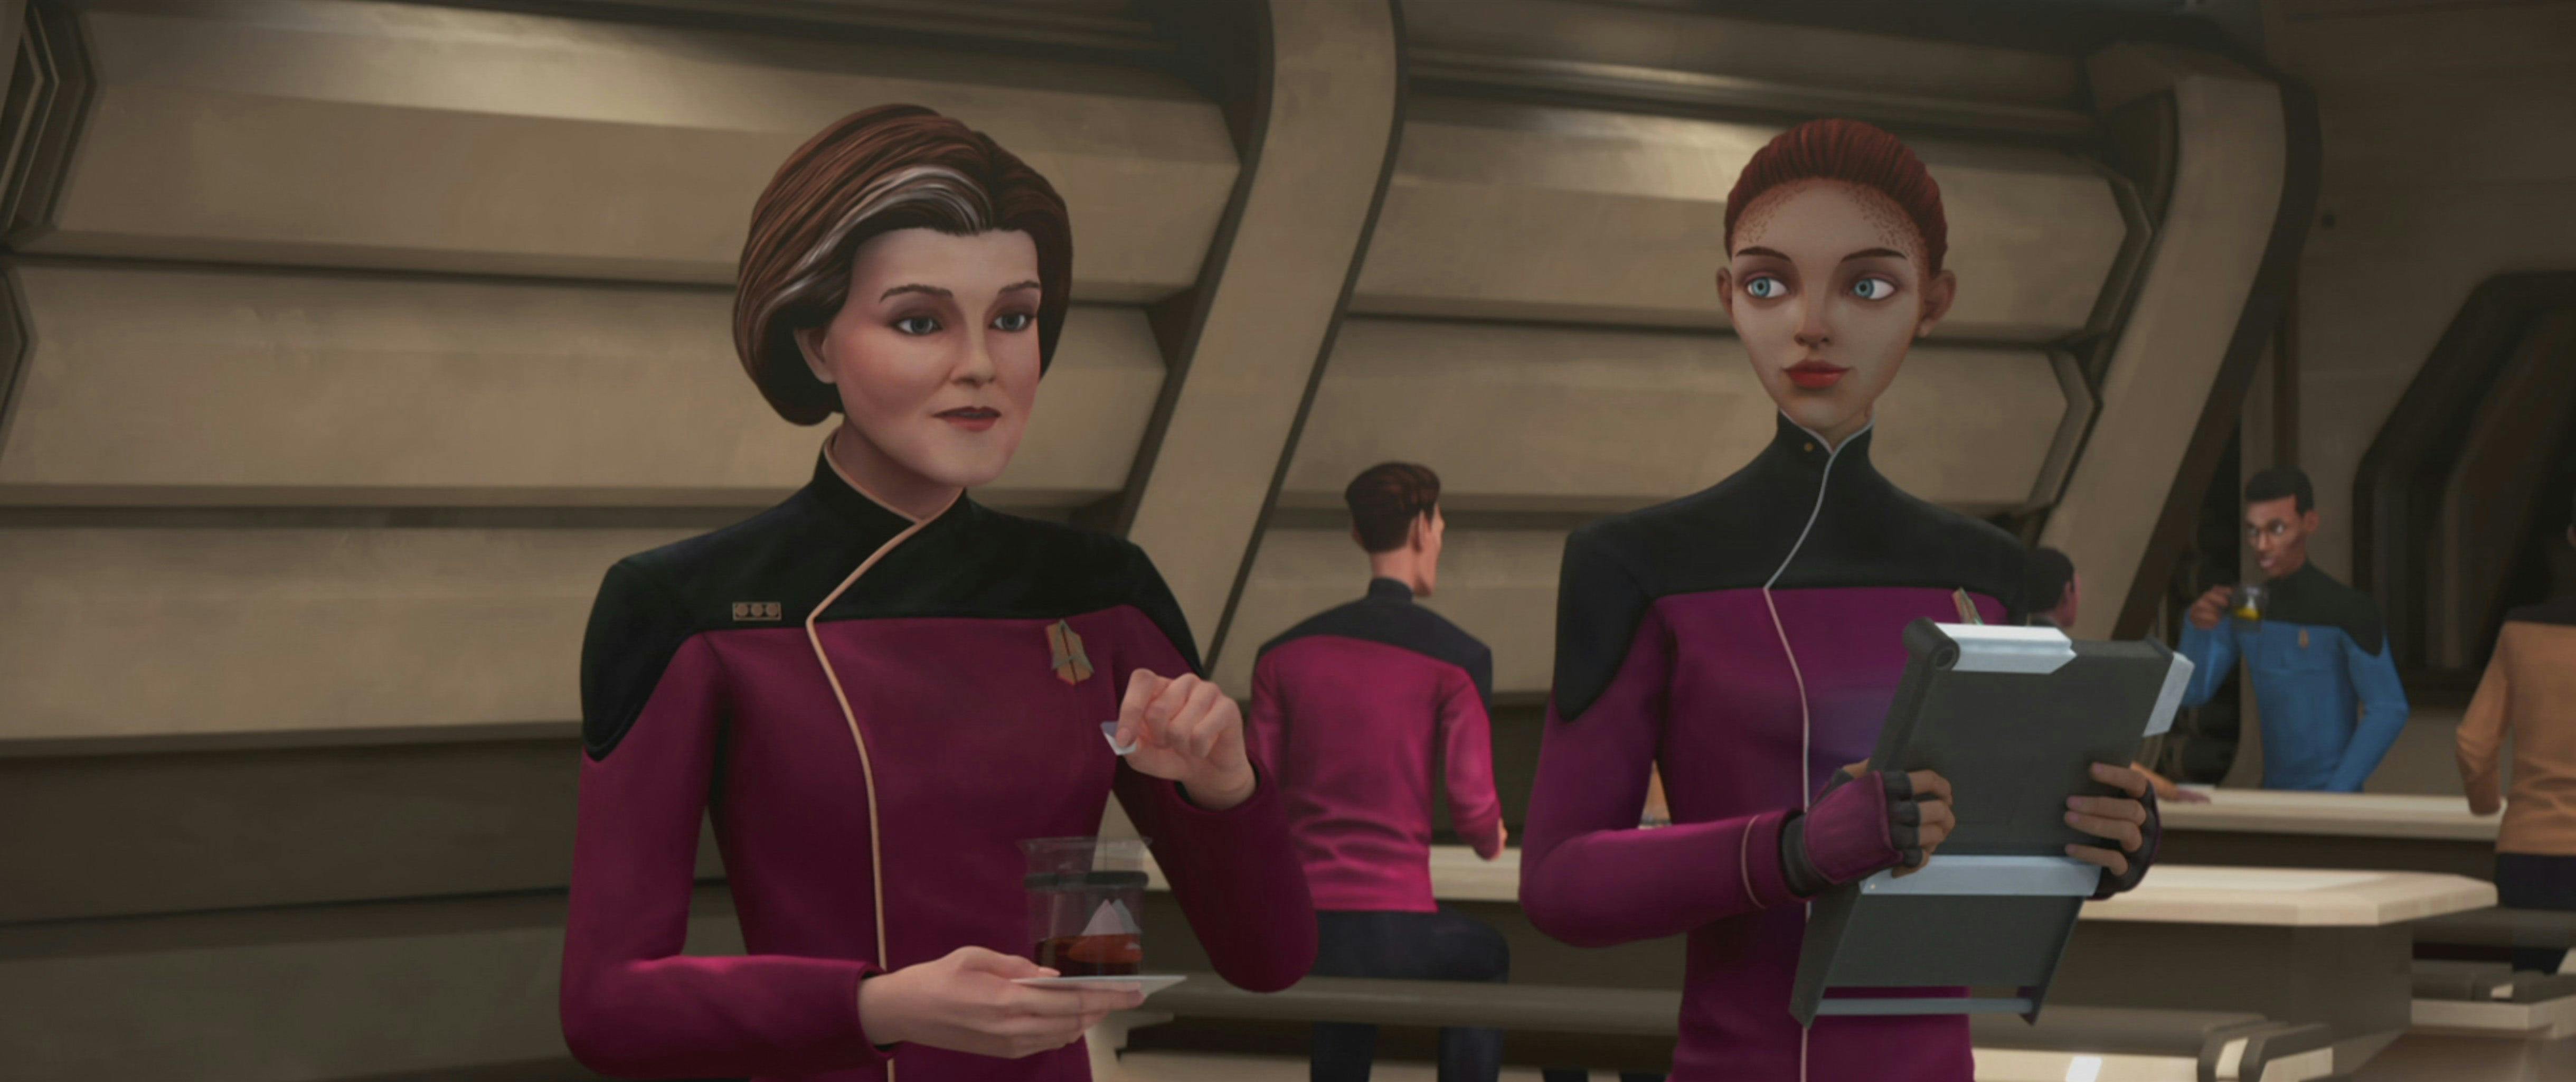 Admiral Janeway prepares a cup of tea as Ensign Ascencia looks over while holding a clipboard on Star Trek: Prodigy